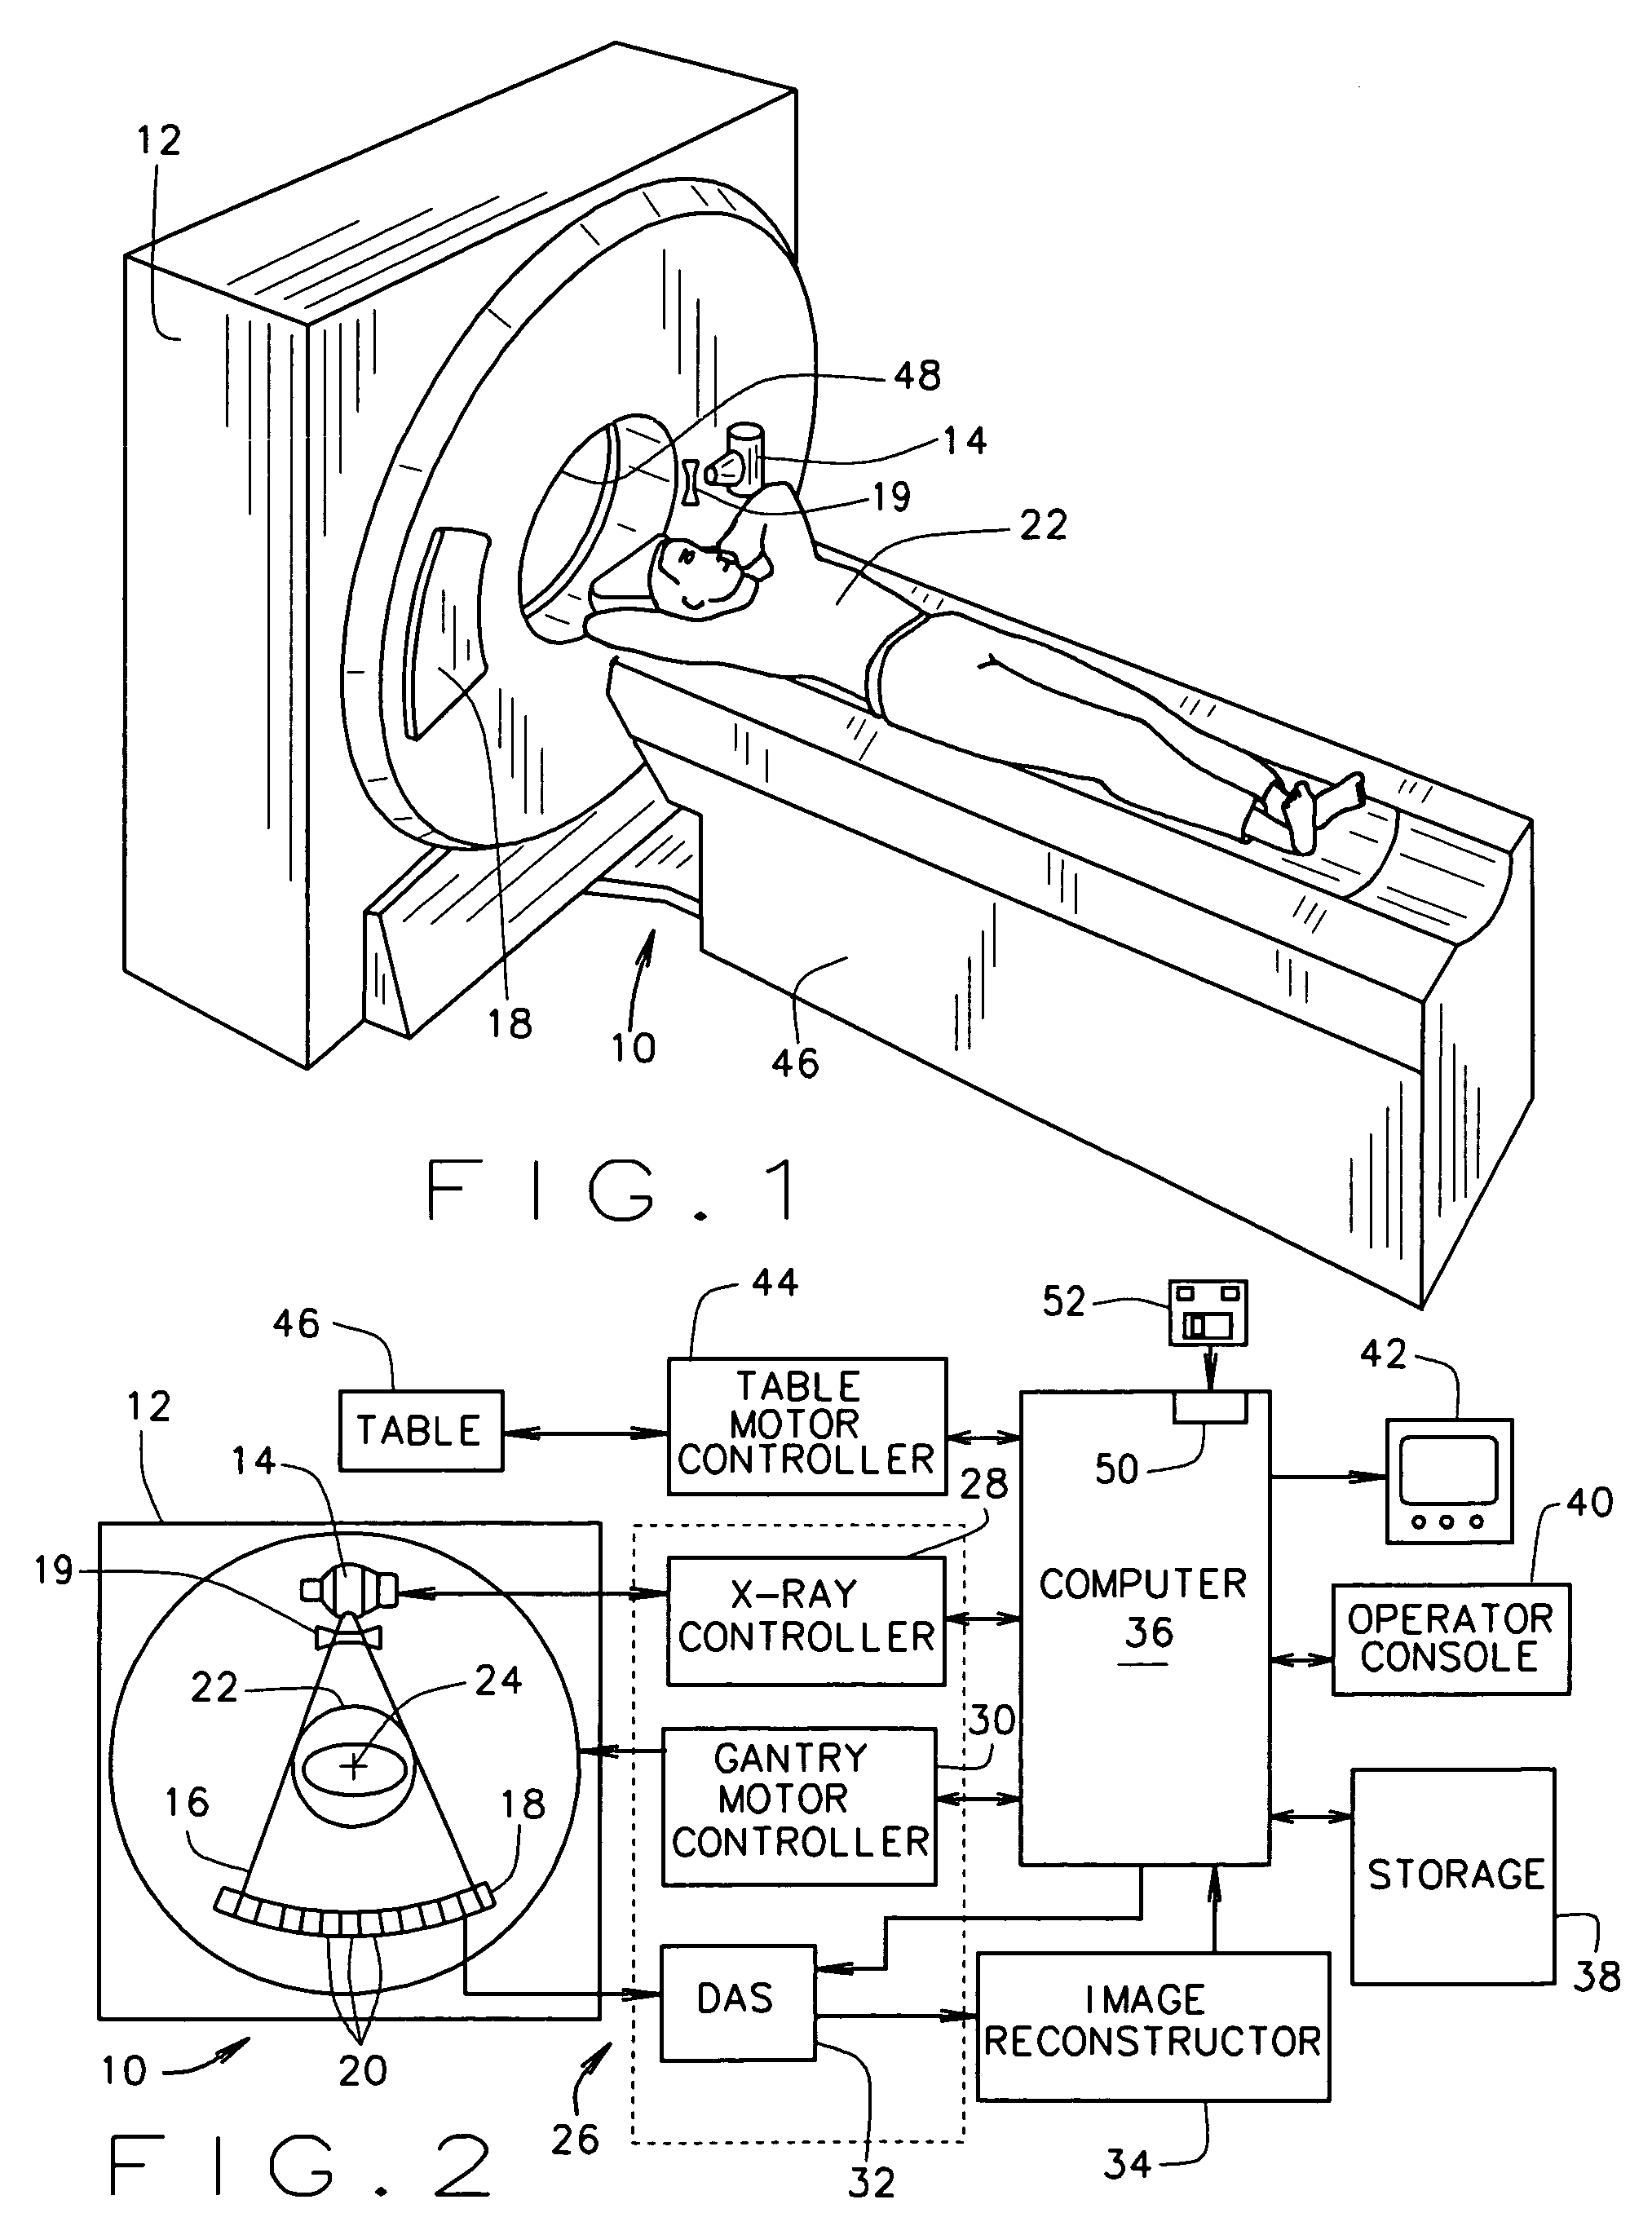 Methods for spectrally calibrating CT imaging apparatus detectors